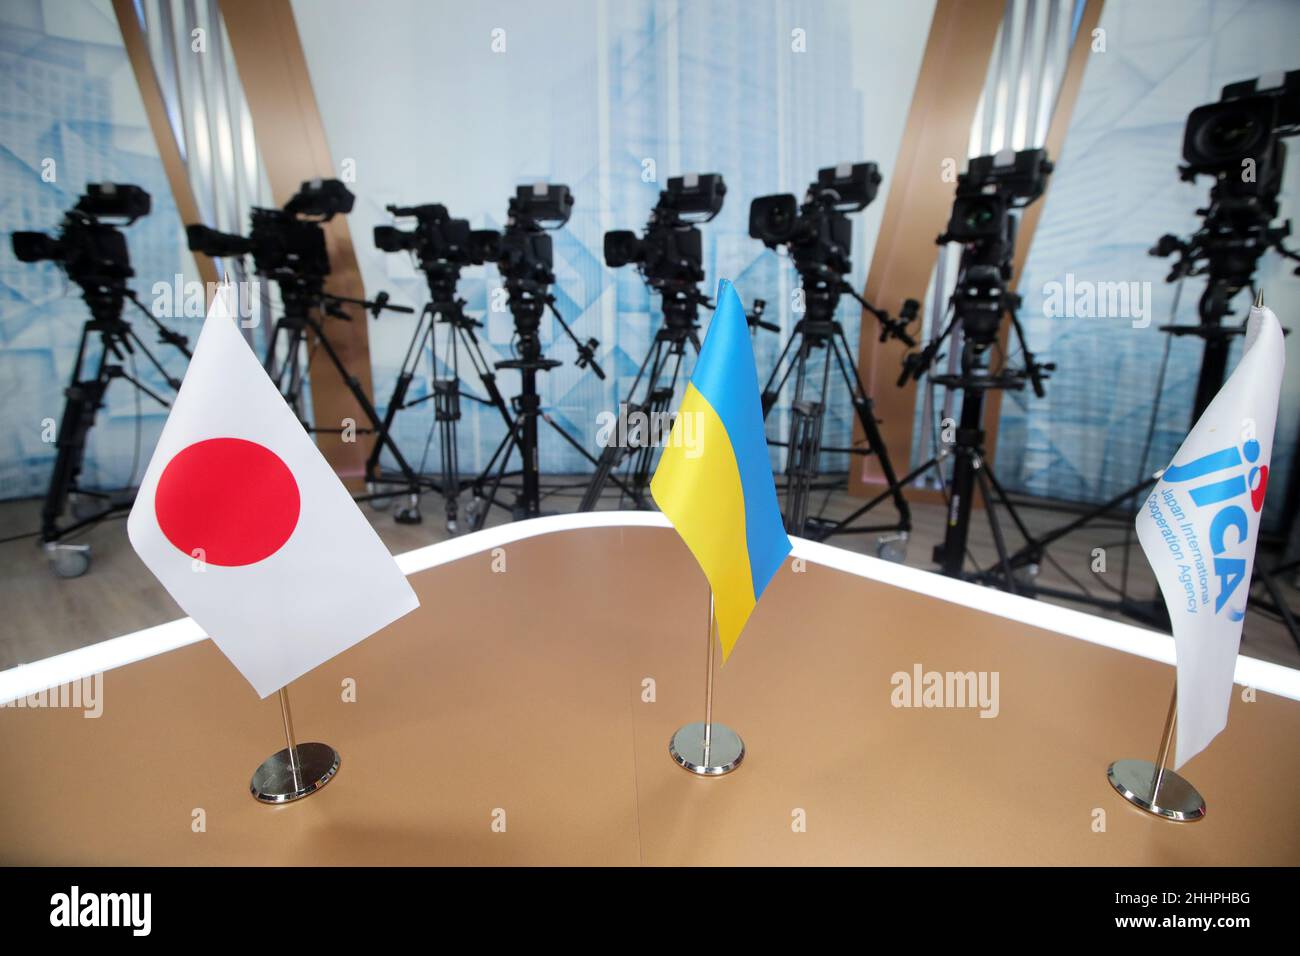 KYIV, UKRAINE - JANUARY 25, 2022 - The table flags of Japan and Ukraine are pictured during the official ceremony to convey new equipment from Japan t Stock Photo